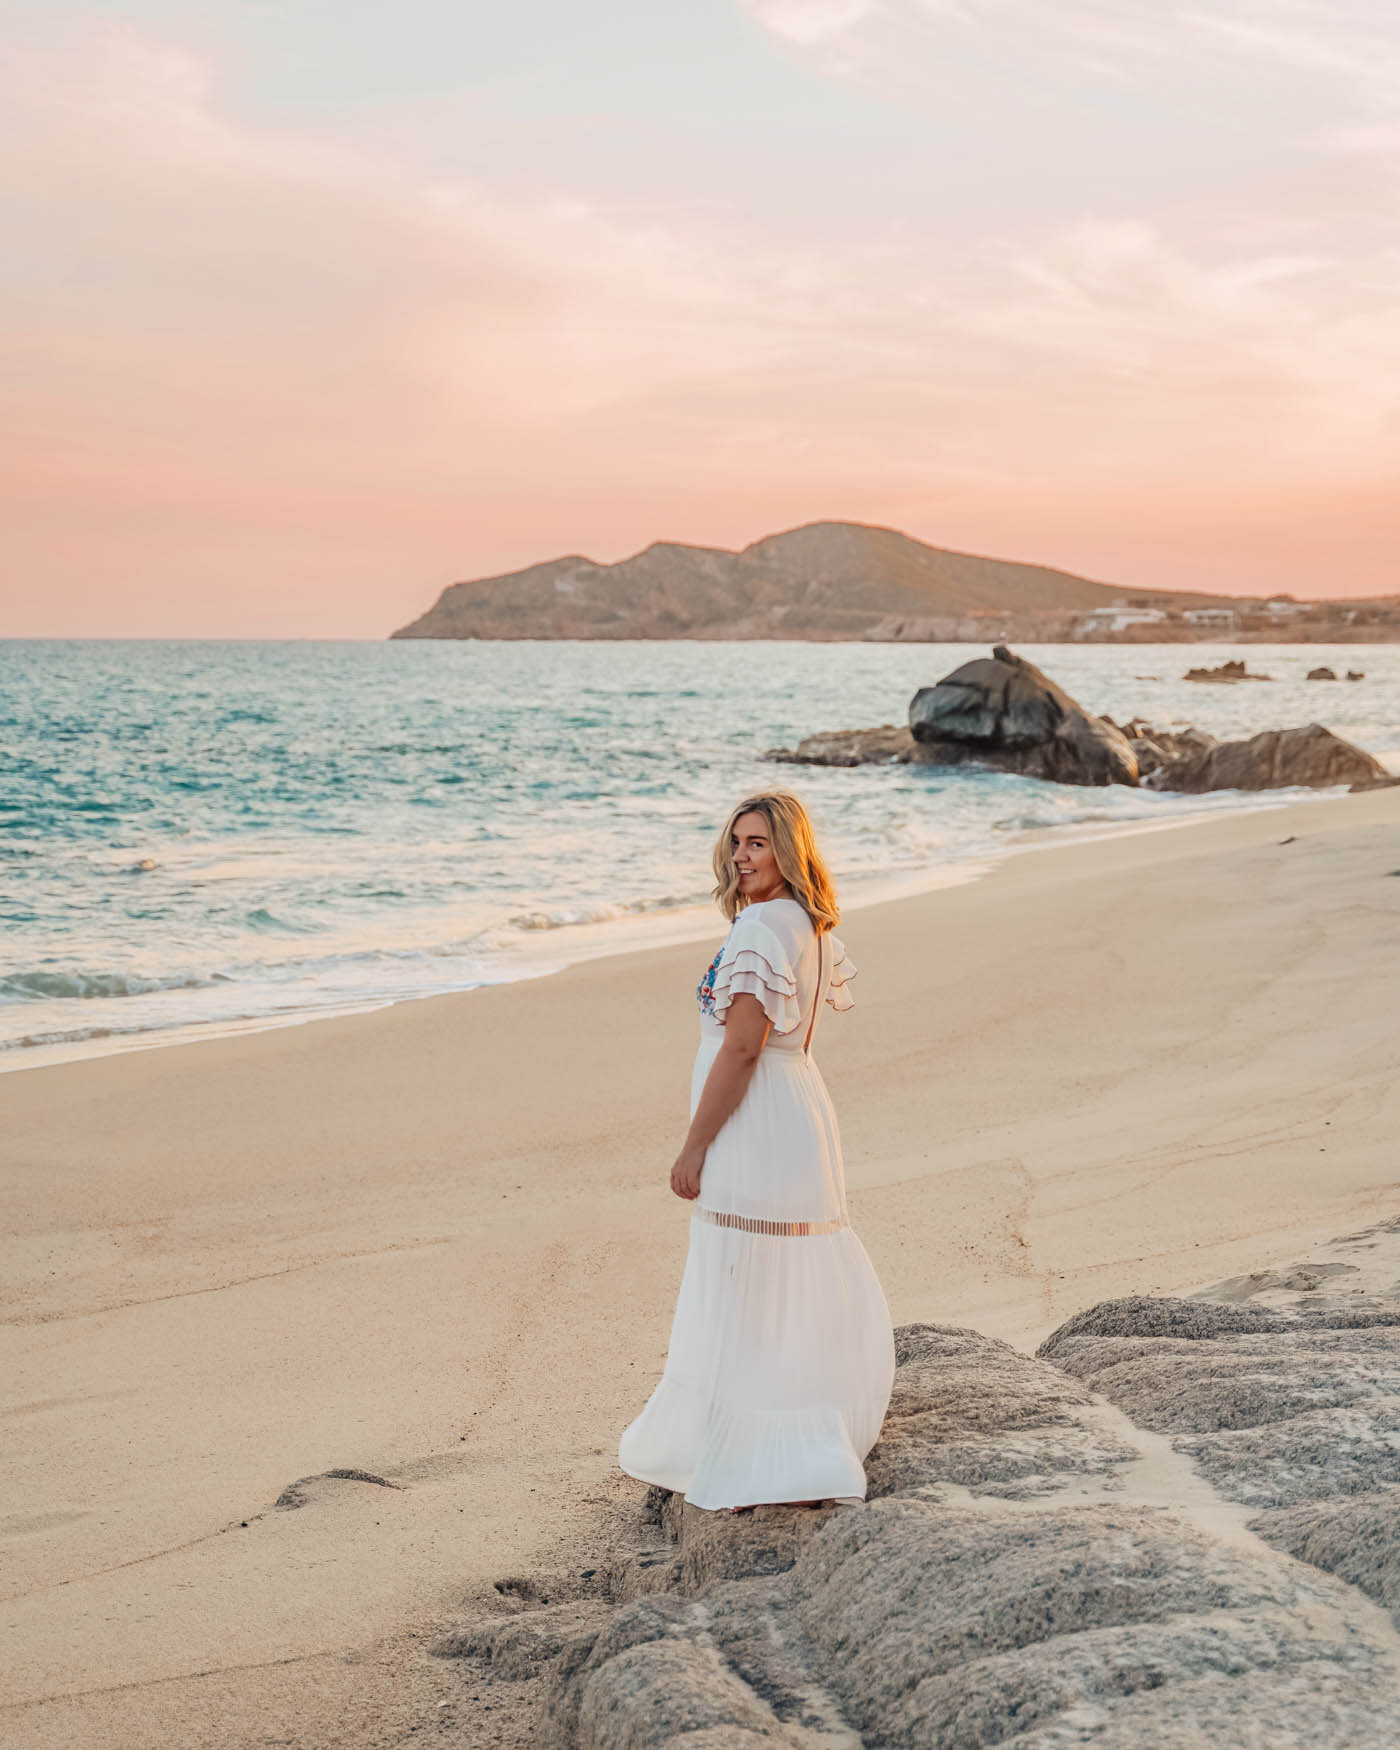 woman-beach-cabo-mexico-sunset-pink.jpg